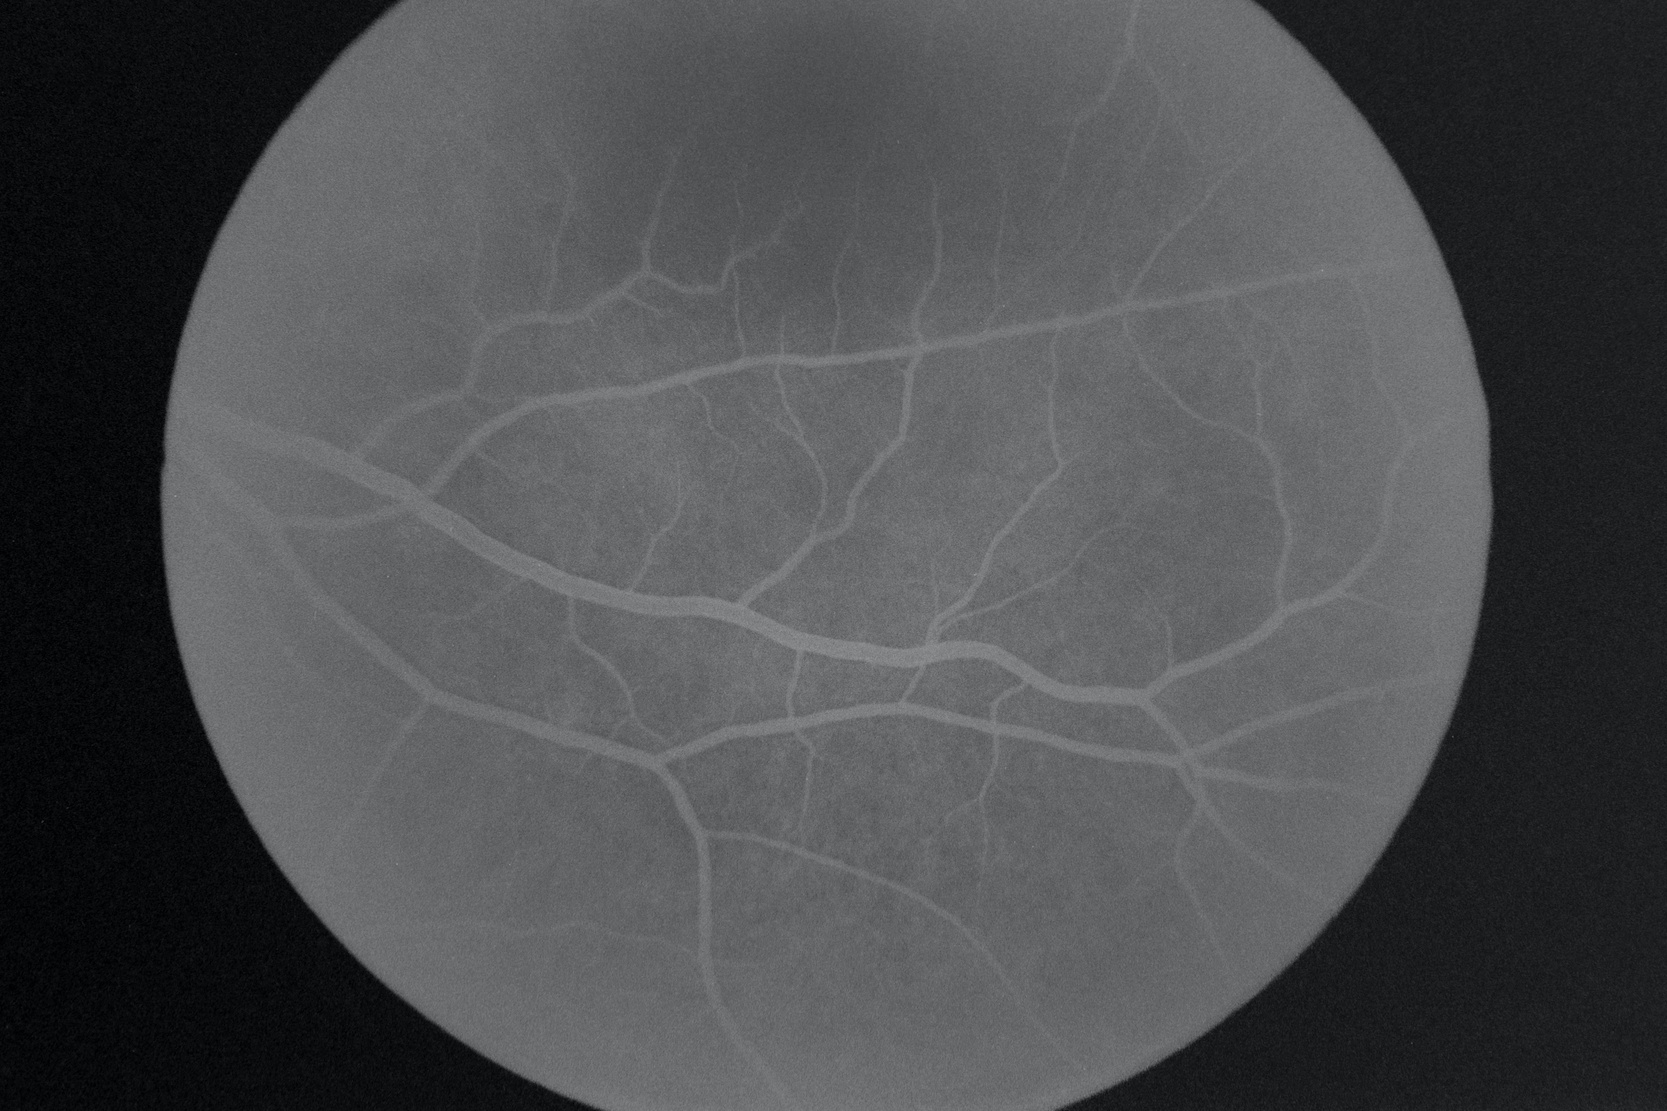 Fluorescein angiography of eye disease in the foreground